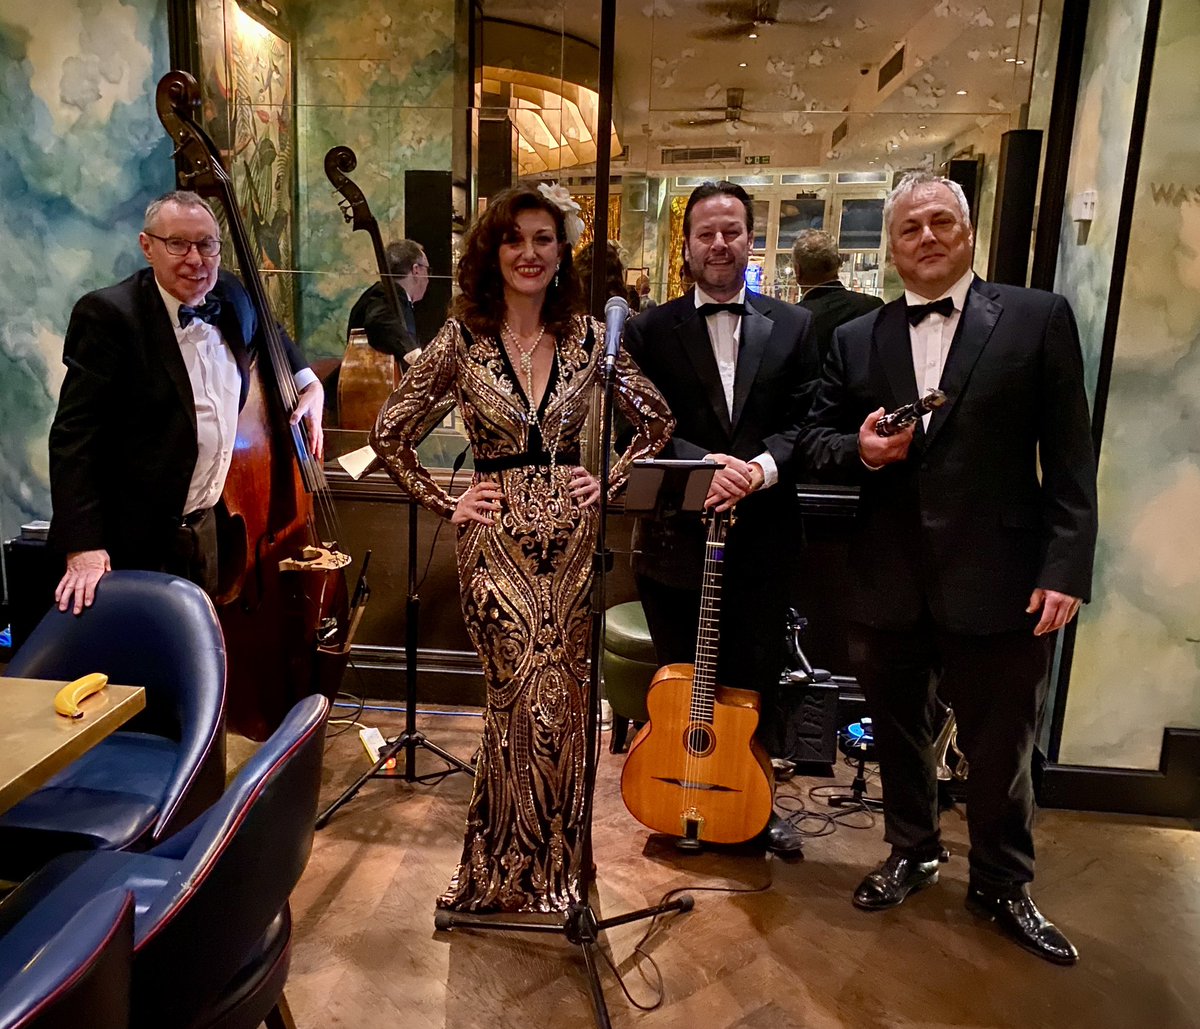 HNY! Great time playing in #LondonNYE with Peter Long, Louise Cookman & Paul Scott at #TheBotanist in #sloanesquare for a 1920’s themed evening #swingjazz #London #earlyjazz #vocals #clarinet #doublebass #guitar